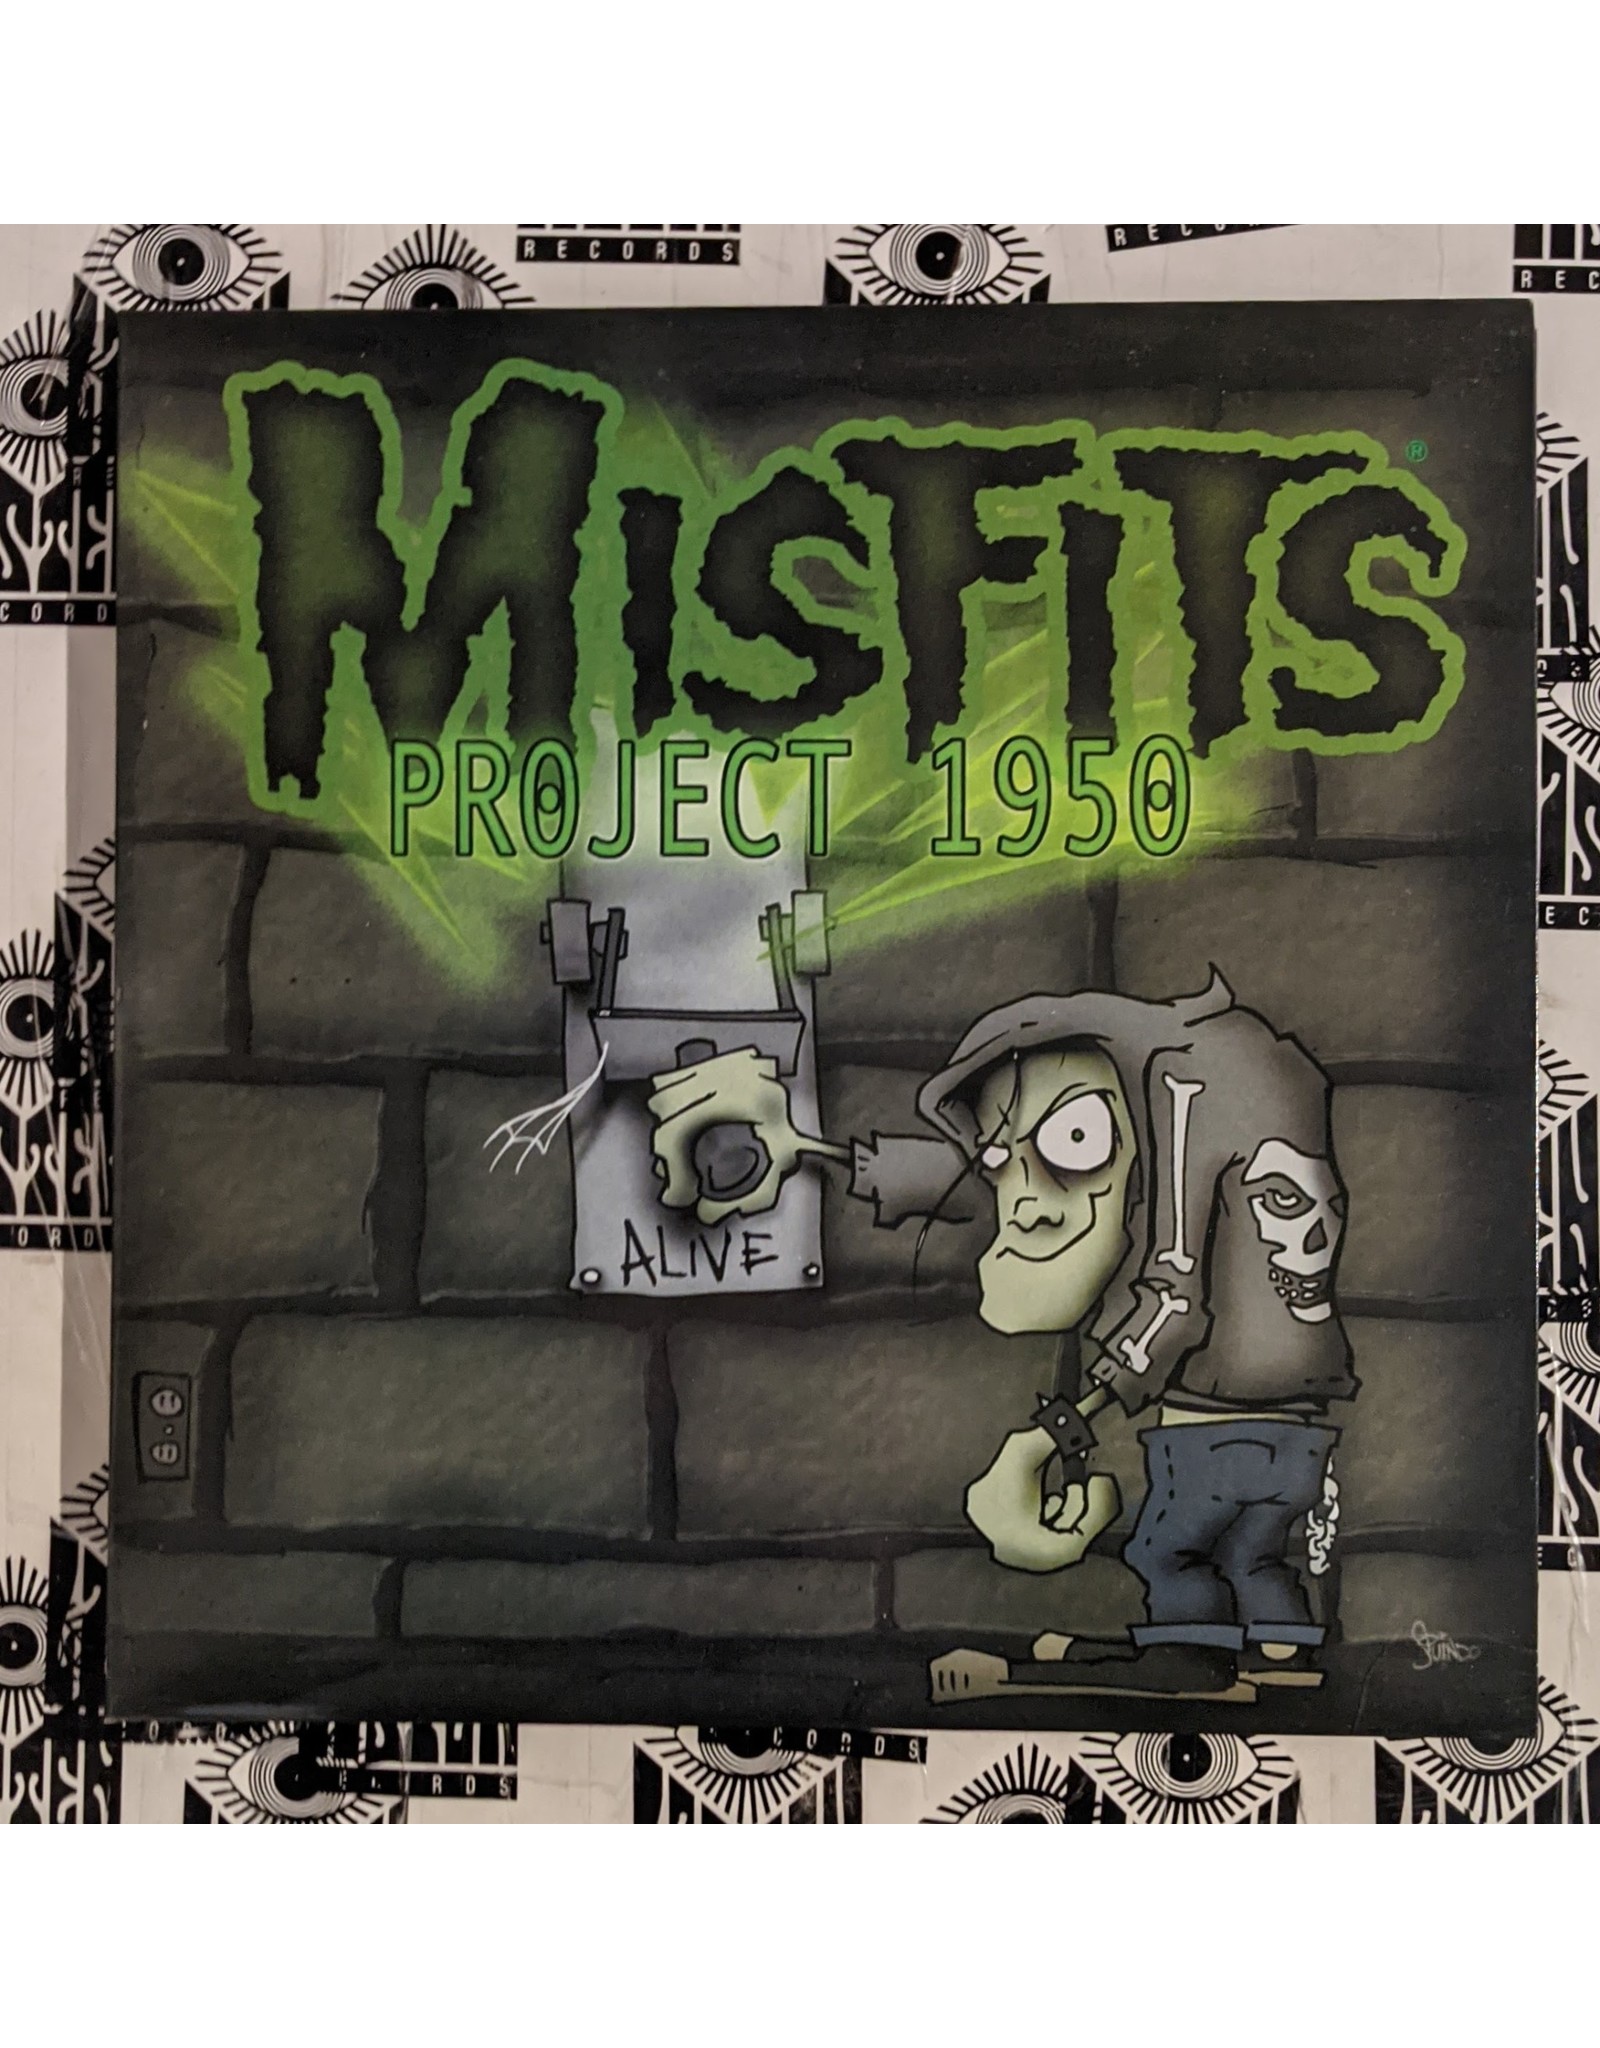 USED: Misfits: Project 1950 LP - Listen Records